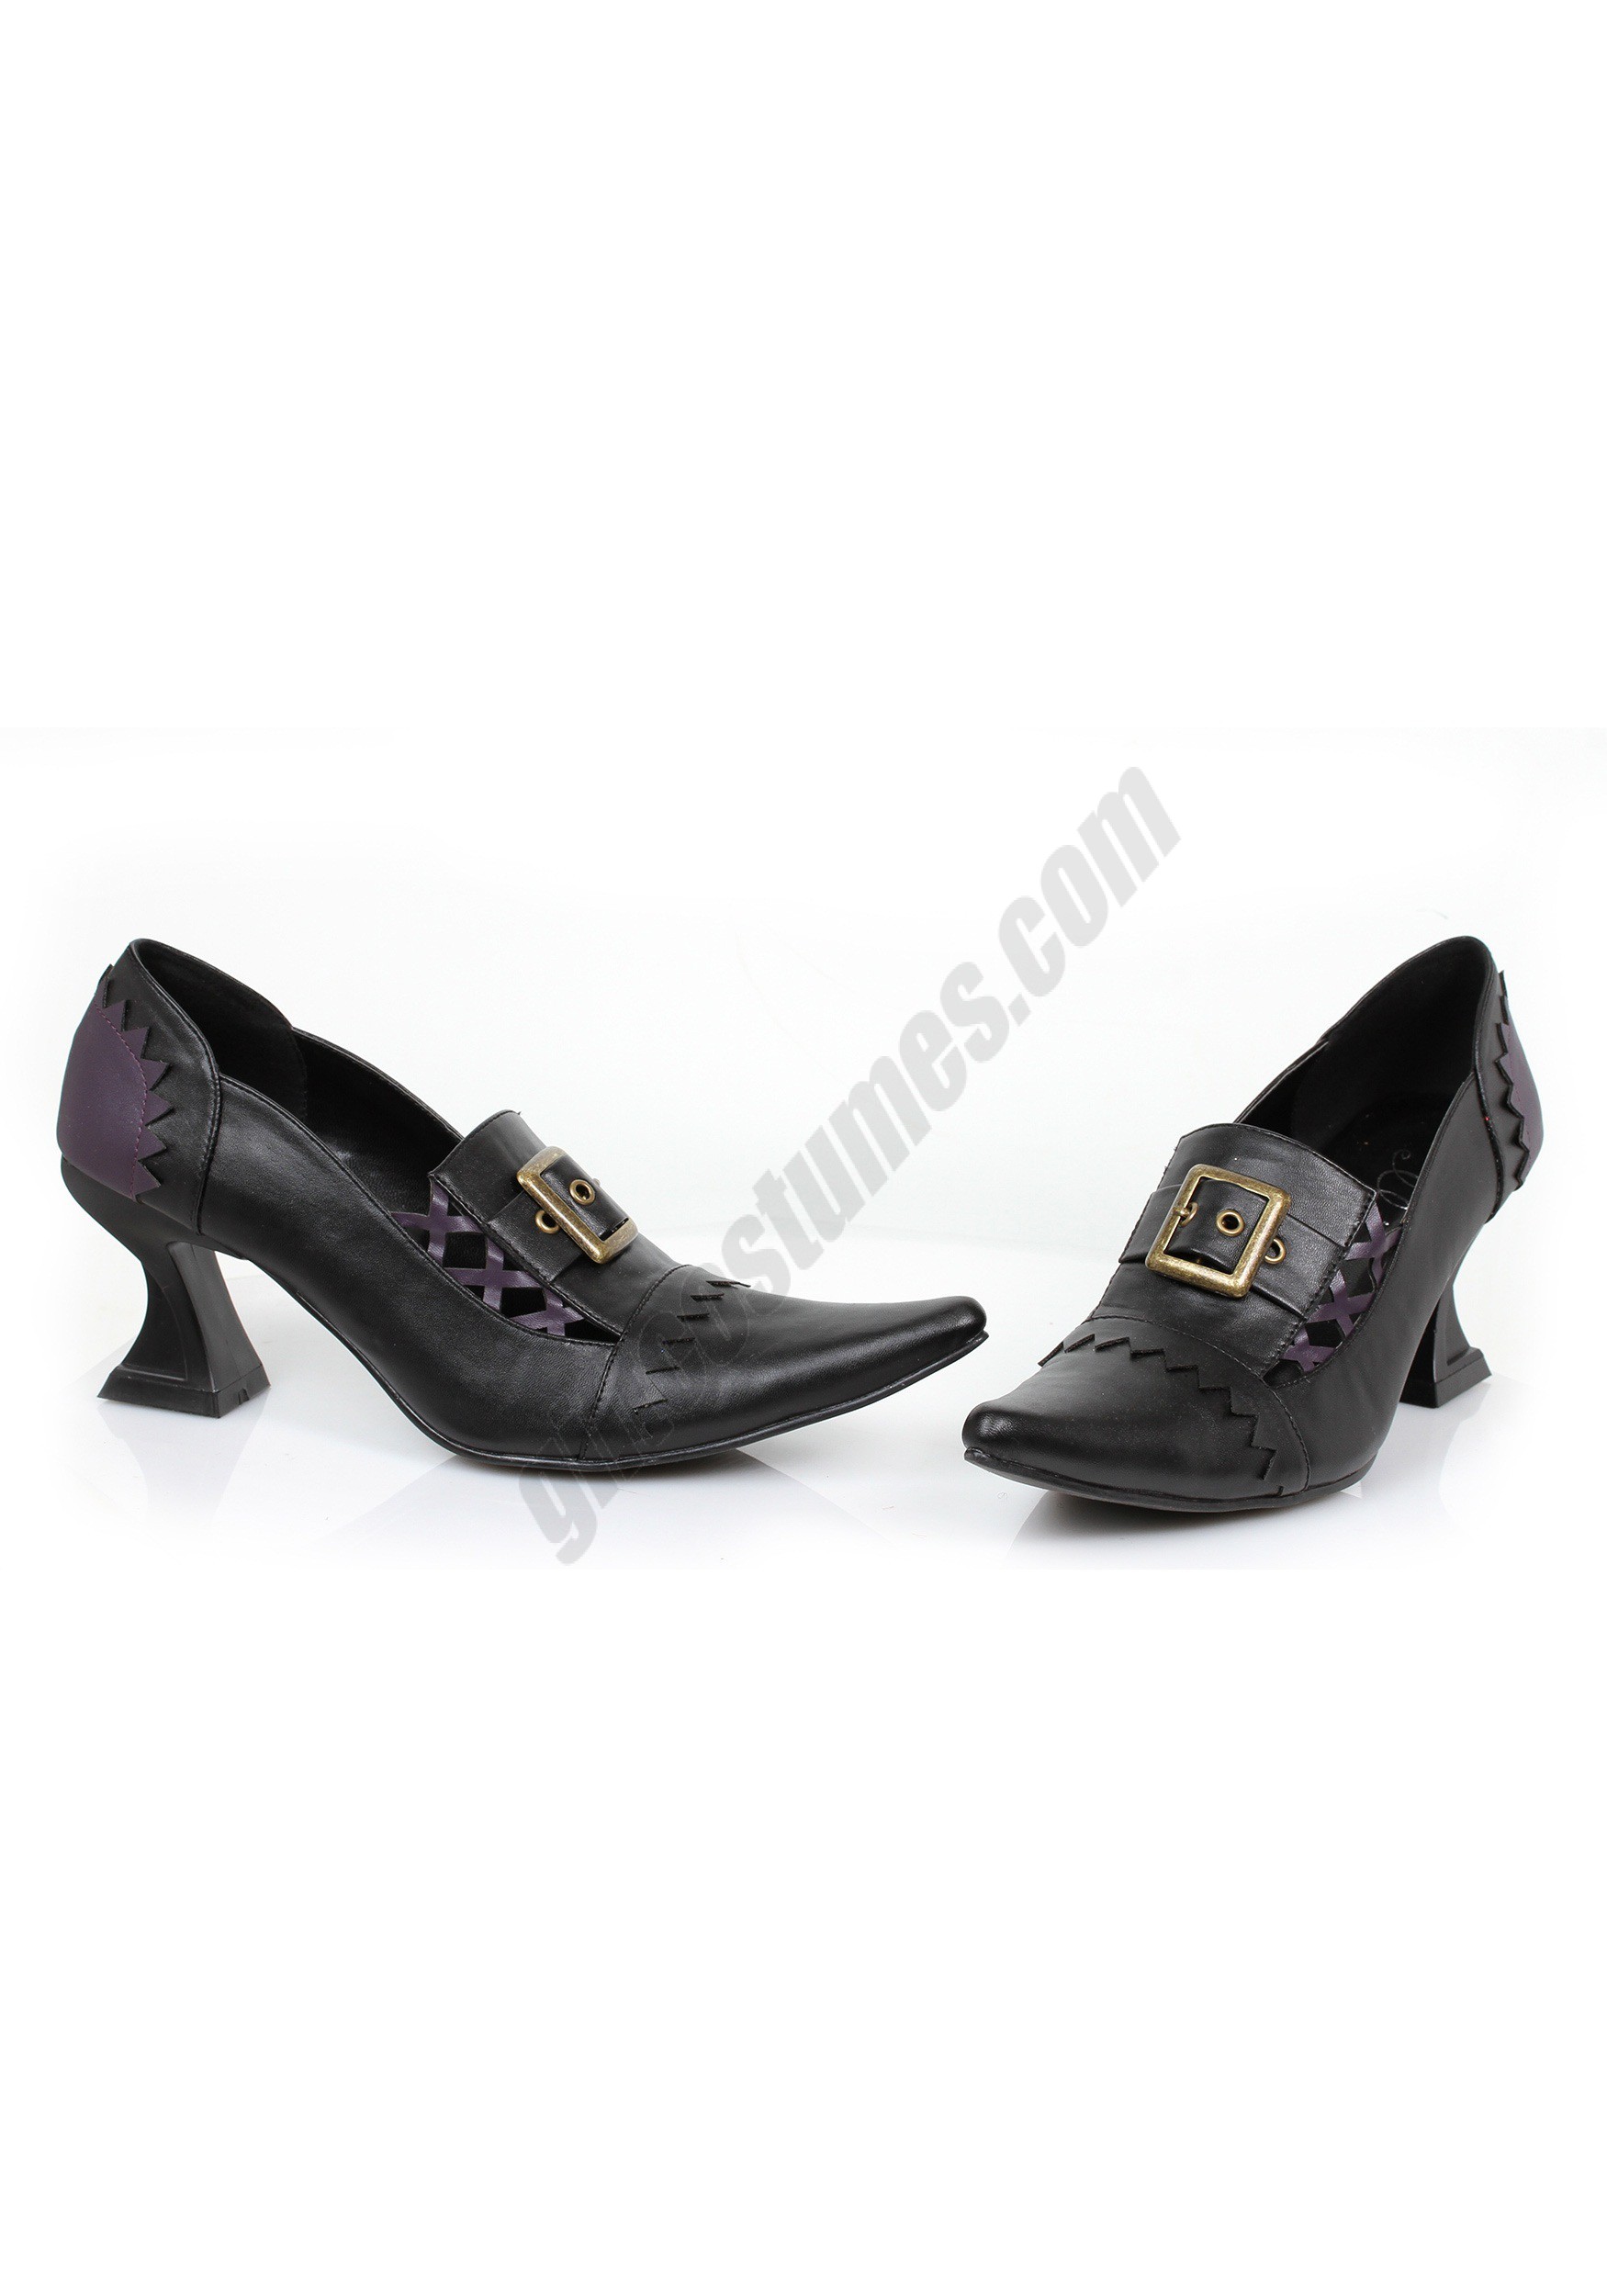 Women's Deluxe Witch Shoes Promotions - Women's Deluxe Witch Shoes Promotions